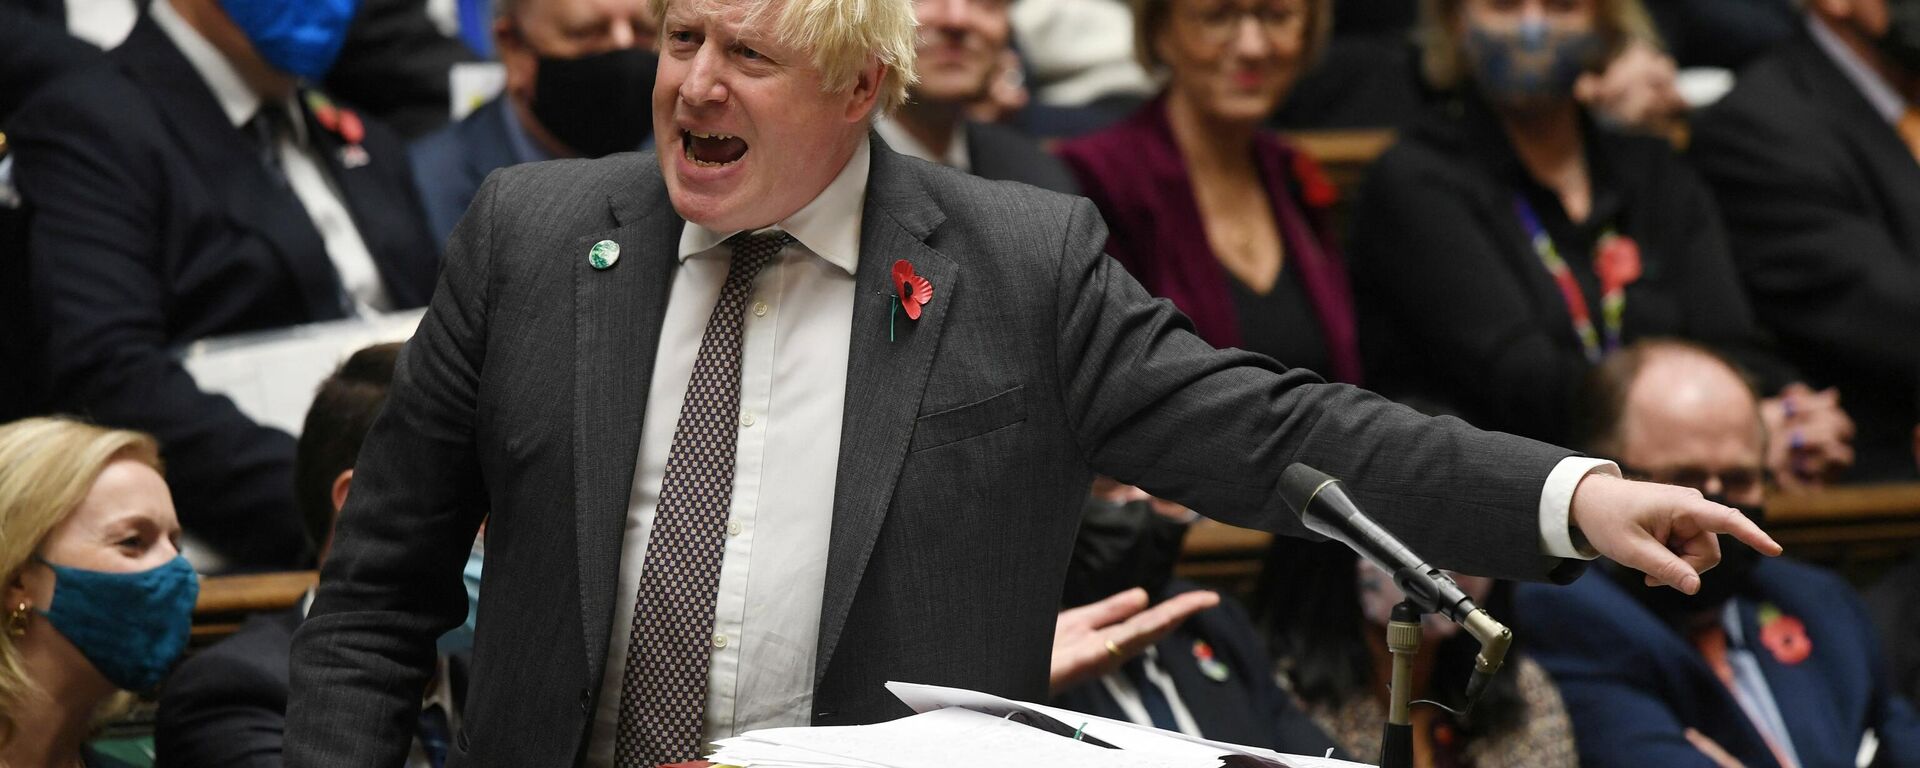 A handout photograph released by the UK Parliament shows Britain's Prime Minister Boris Johnson speaking during Prime Minister's Questions (PMQs) at the House of Commons, in central London on November 3, 2021  - Sputnik International, 1920, 30.11.2021